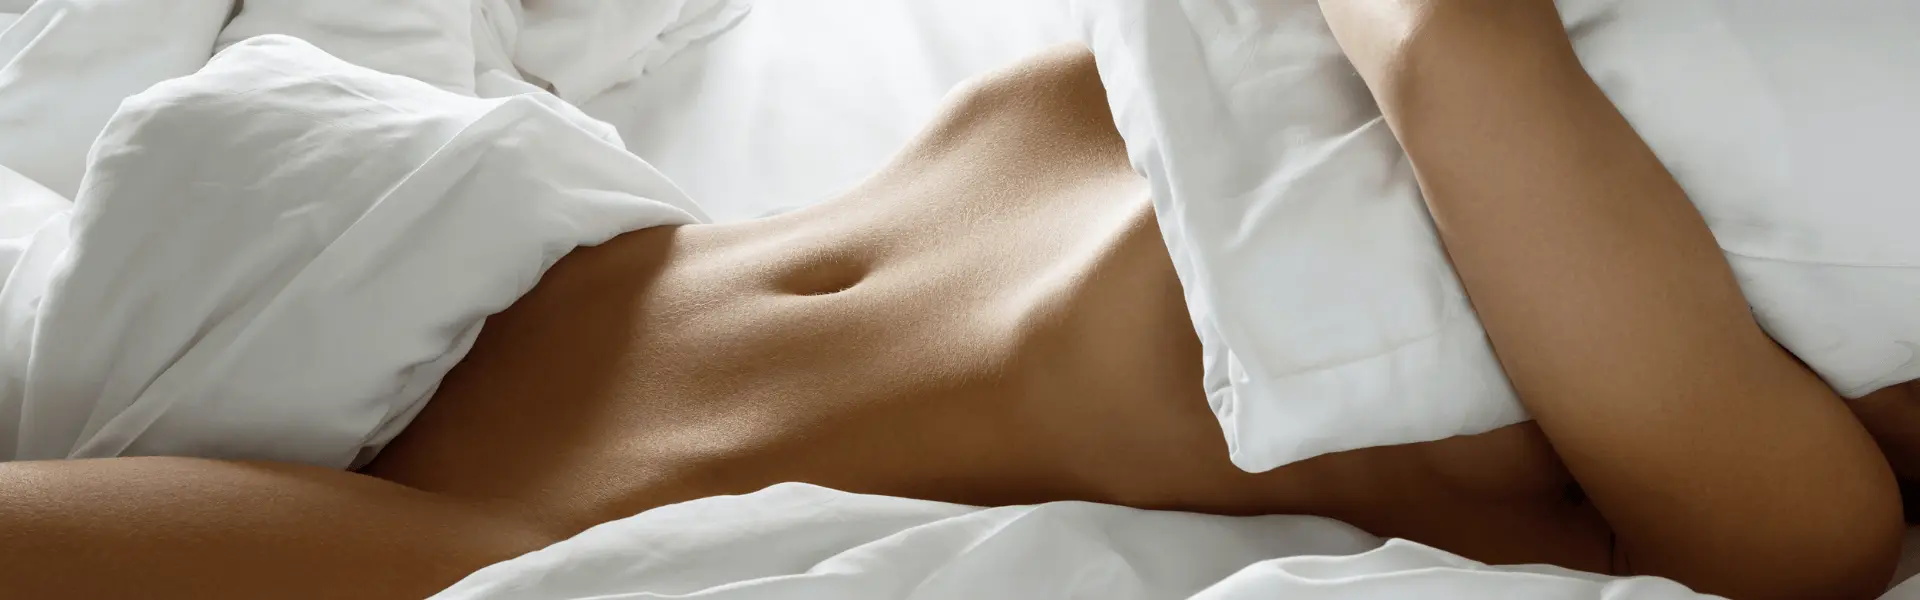 A naked woman laying on a bed with white sheets.